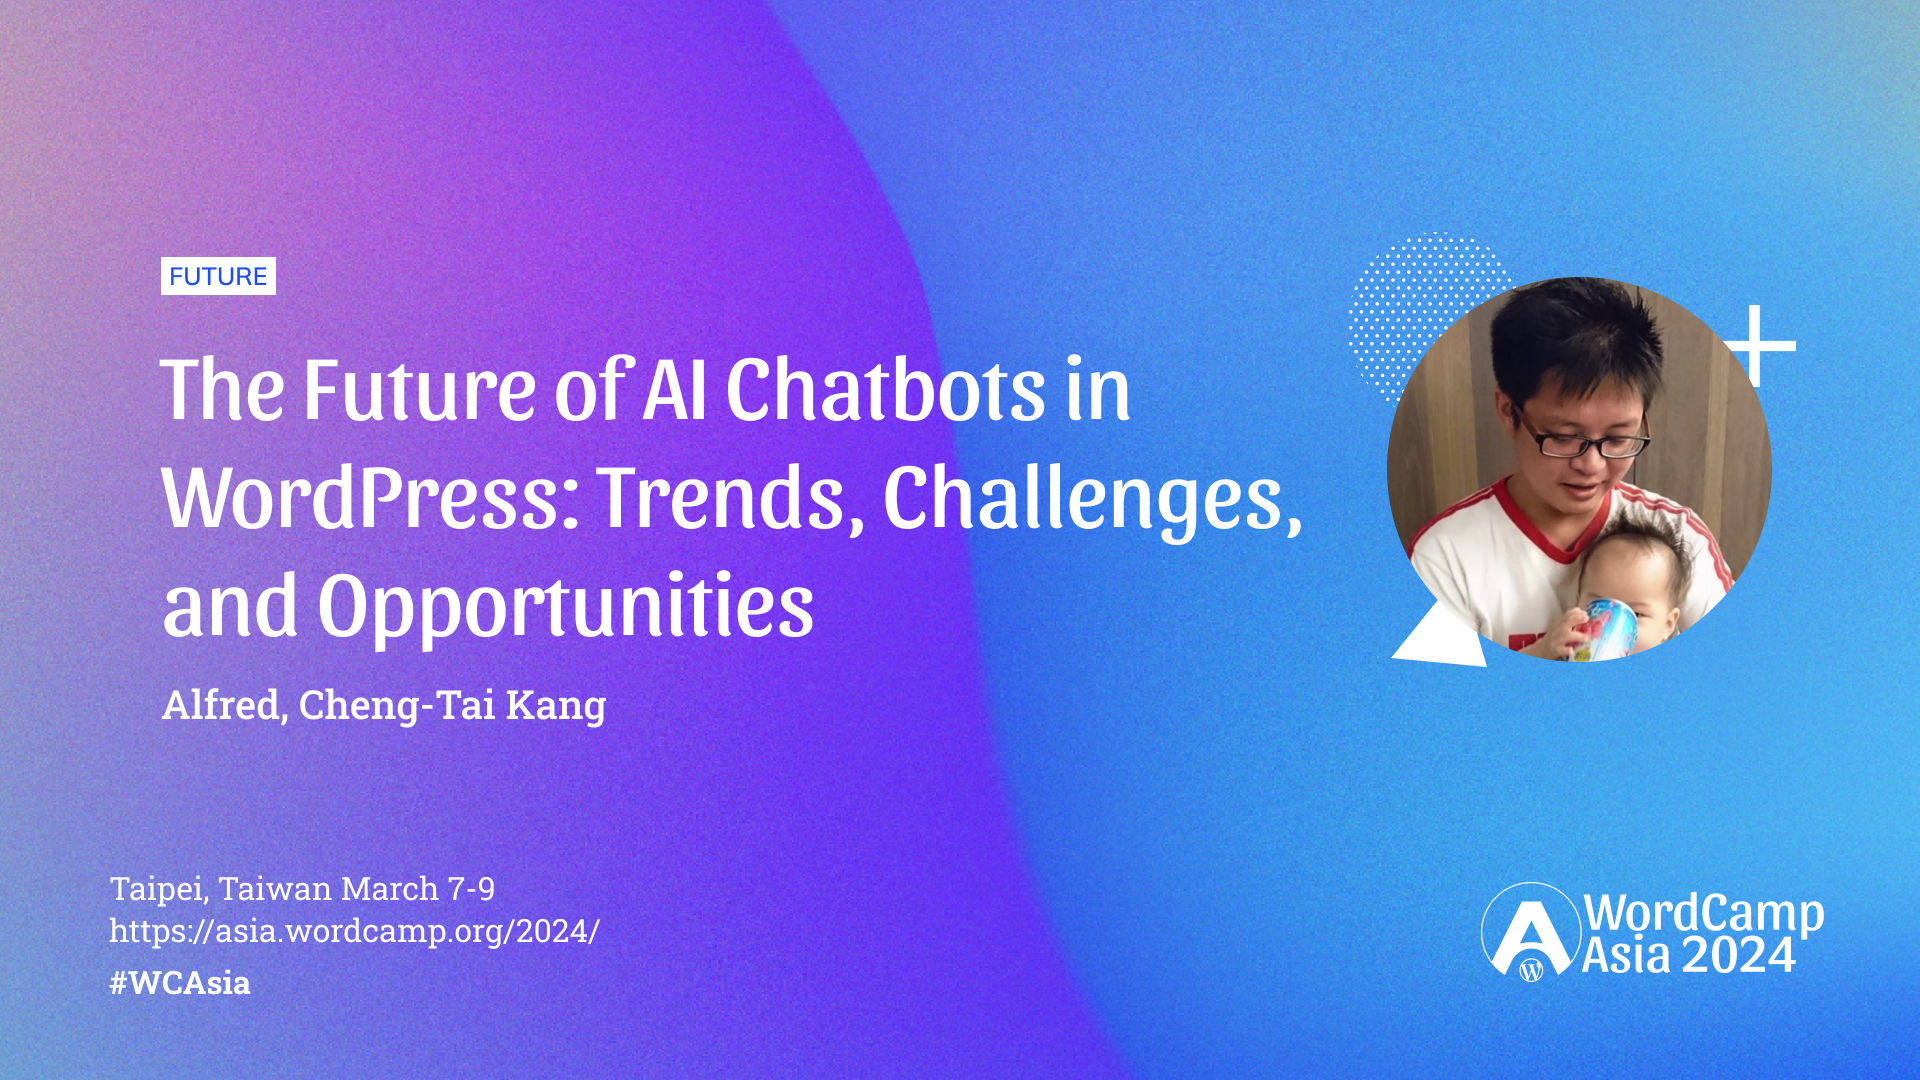 The Future of AI Chatbots in WordPress: Trends, Challenges, and Opportunities